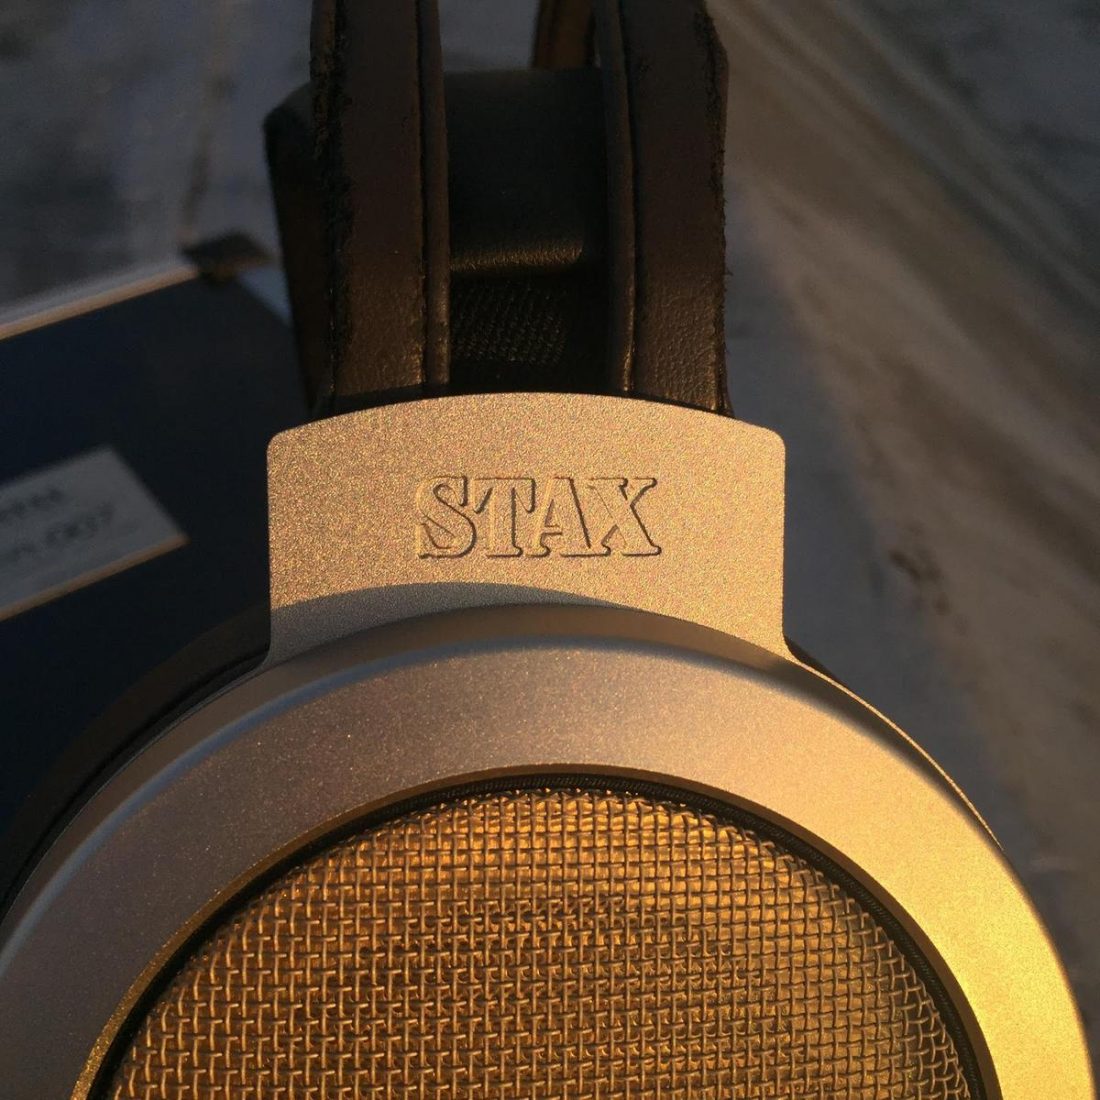 The SR-007's STAX label is understated and elegant!